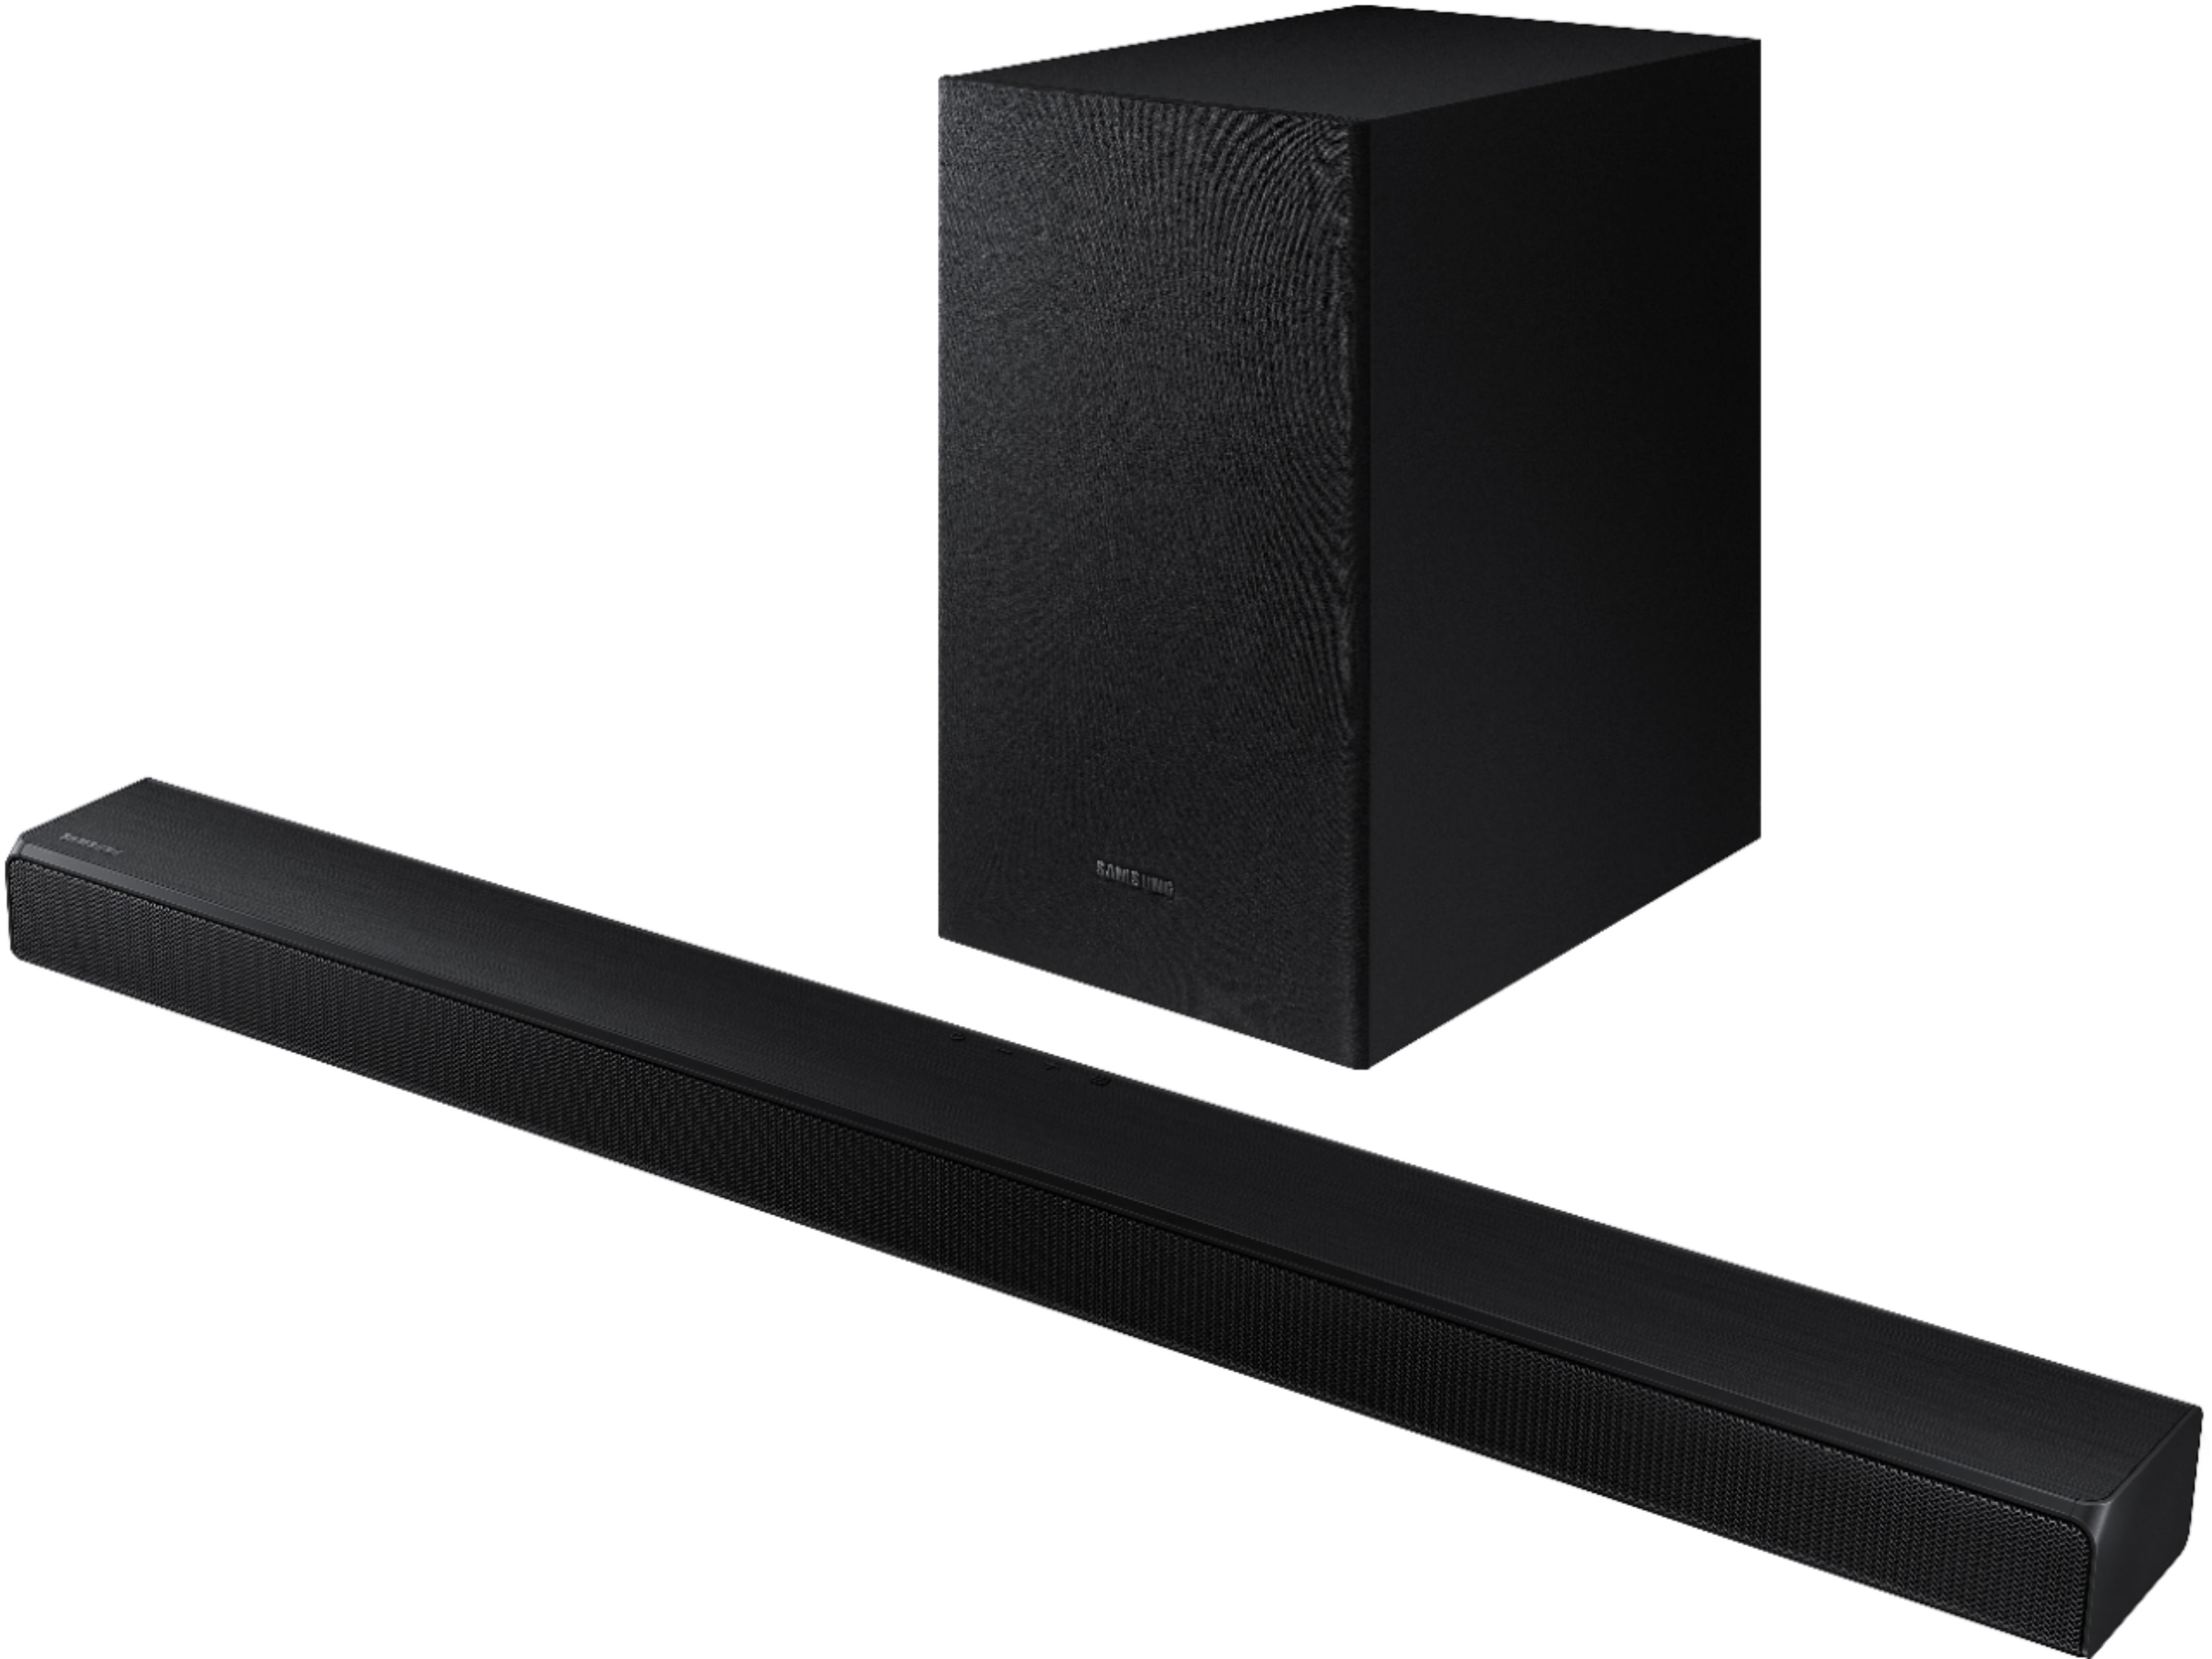 Best Buy: Samsung 2.1-Channel Soundbar with Wireless Subwoofer and Dolby Audio HW-T510/ZA